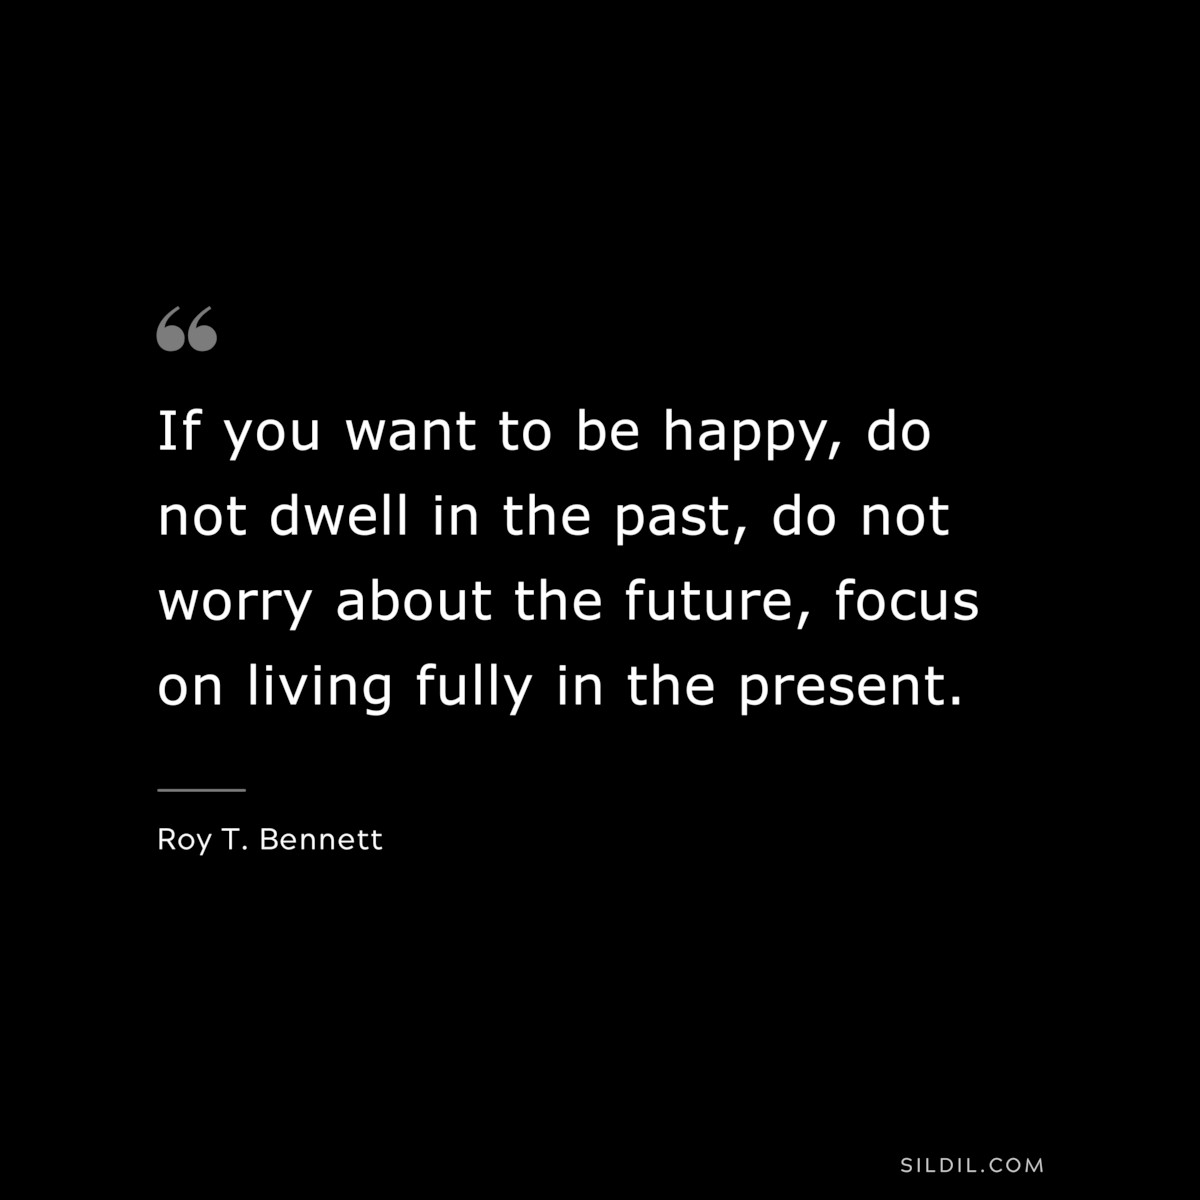 If you want to be happy, do not dwell in the past, do not worry about the future, focus on living fully in the present. ― Roy T. Bennett